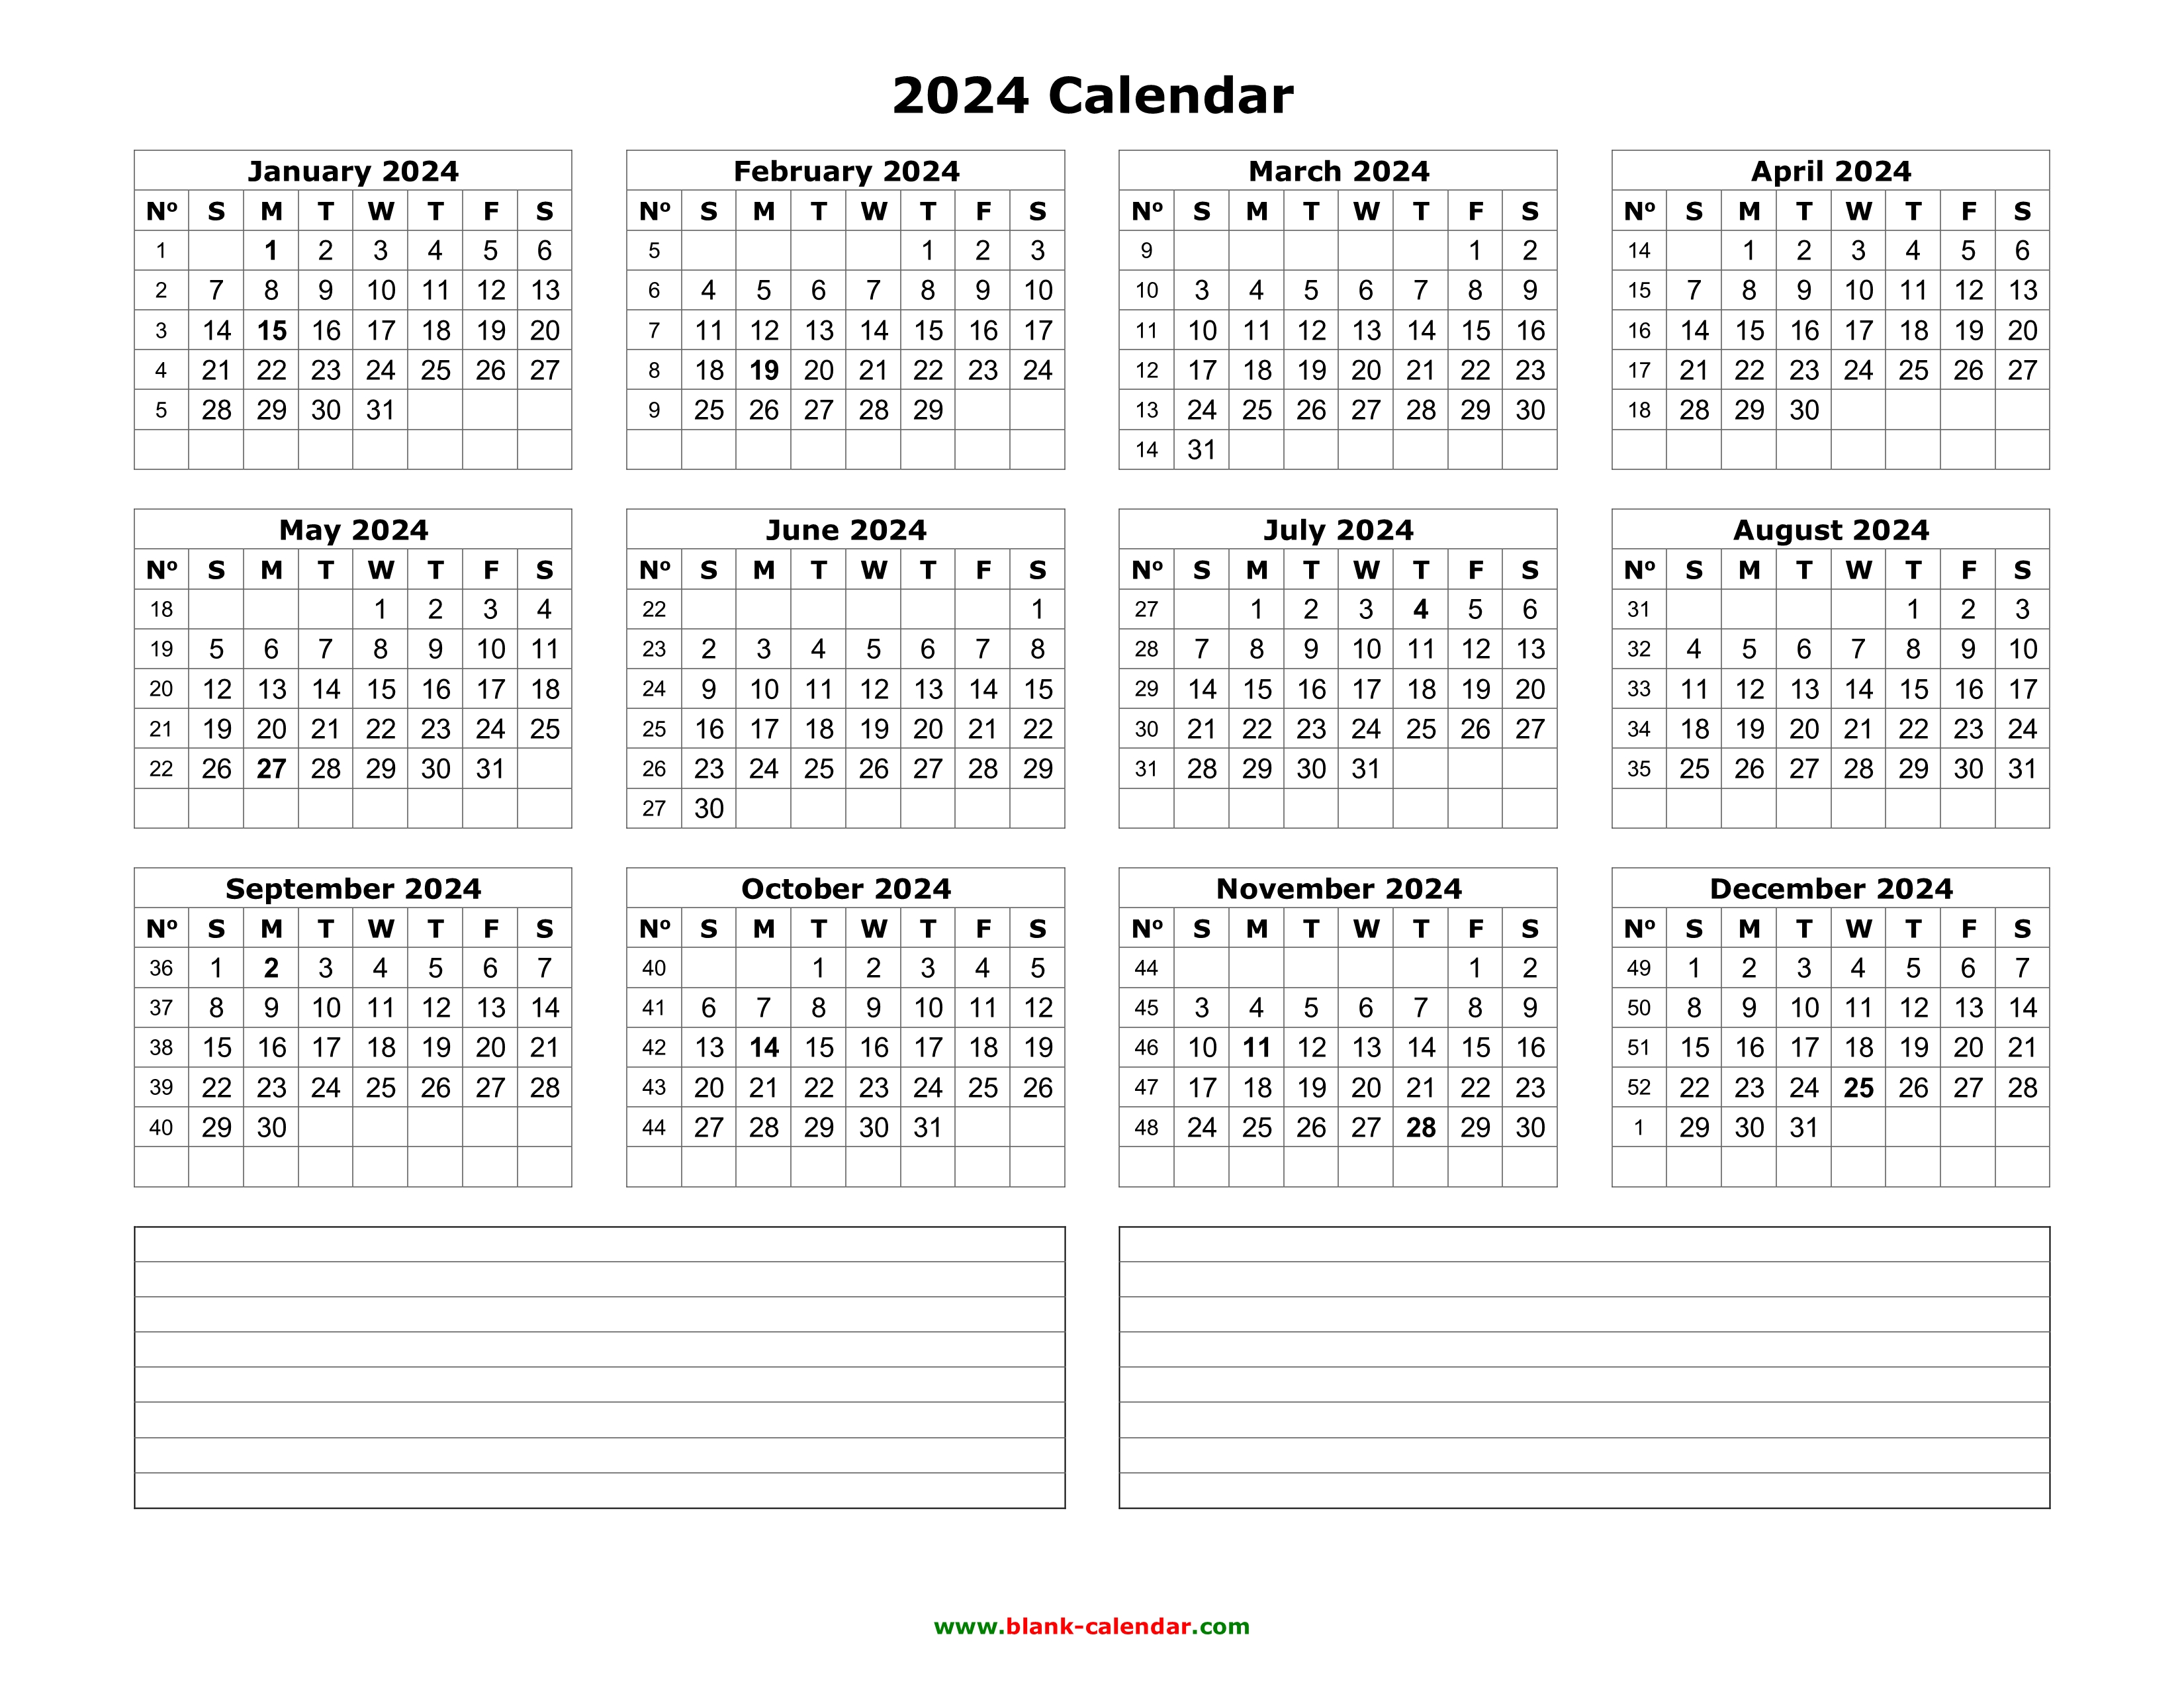 2024 calendar templates and images 2024 calendar templates and images